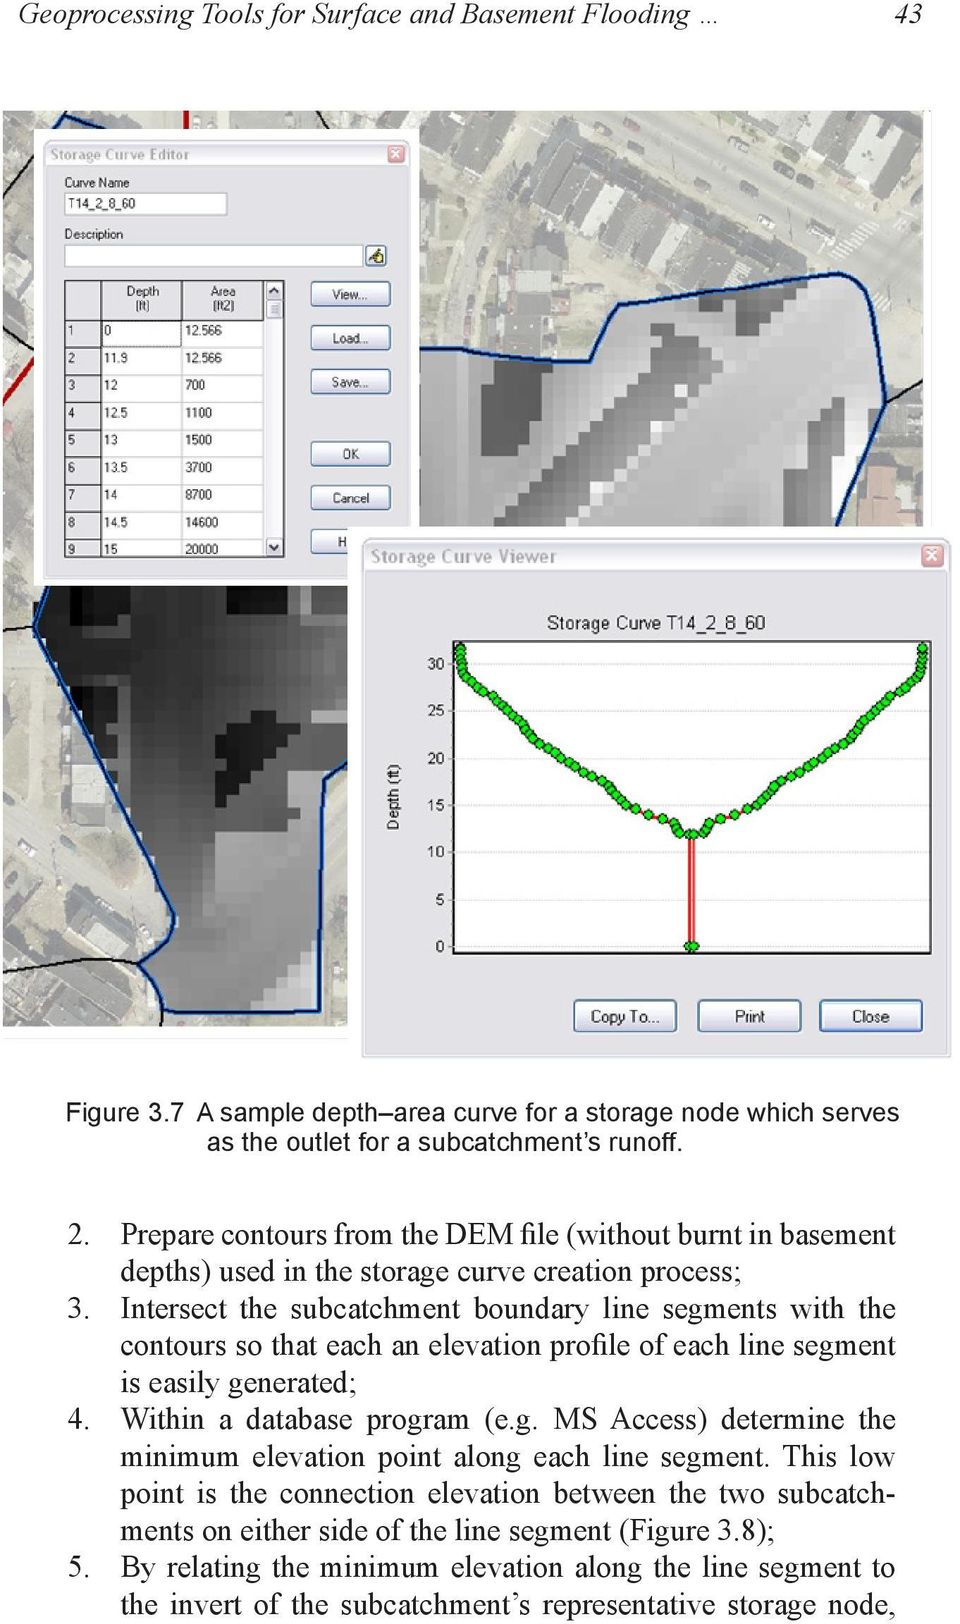 Intersect the subcatchment boundary line segments with the contours so that each an elevation profile of each line segment is easily generated; 4. Within a database program (e.g. MS Access) determine the minimum elevation point along each line segment.